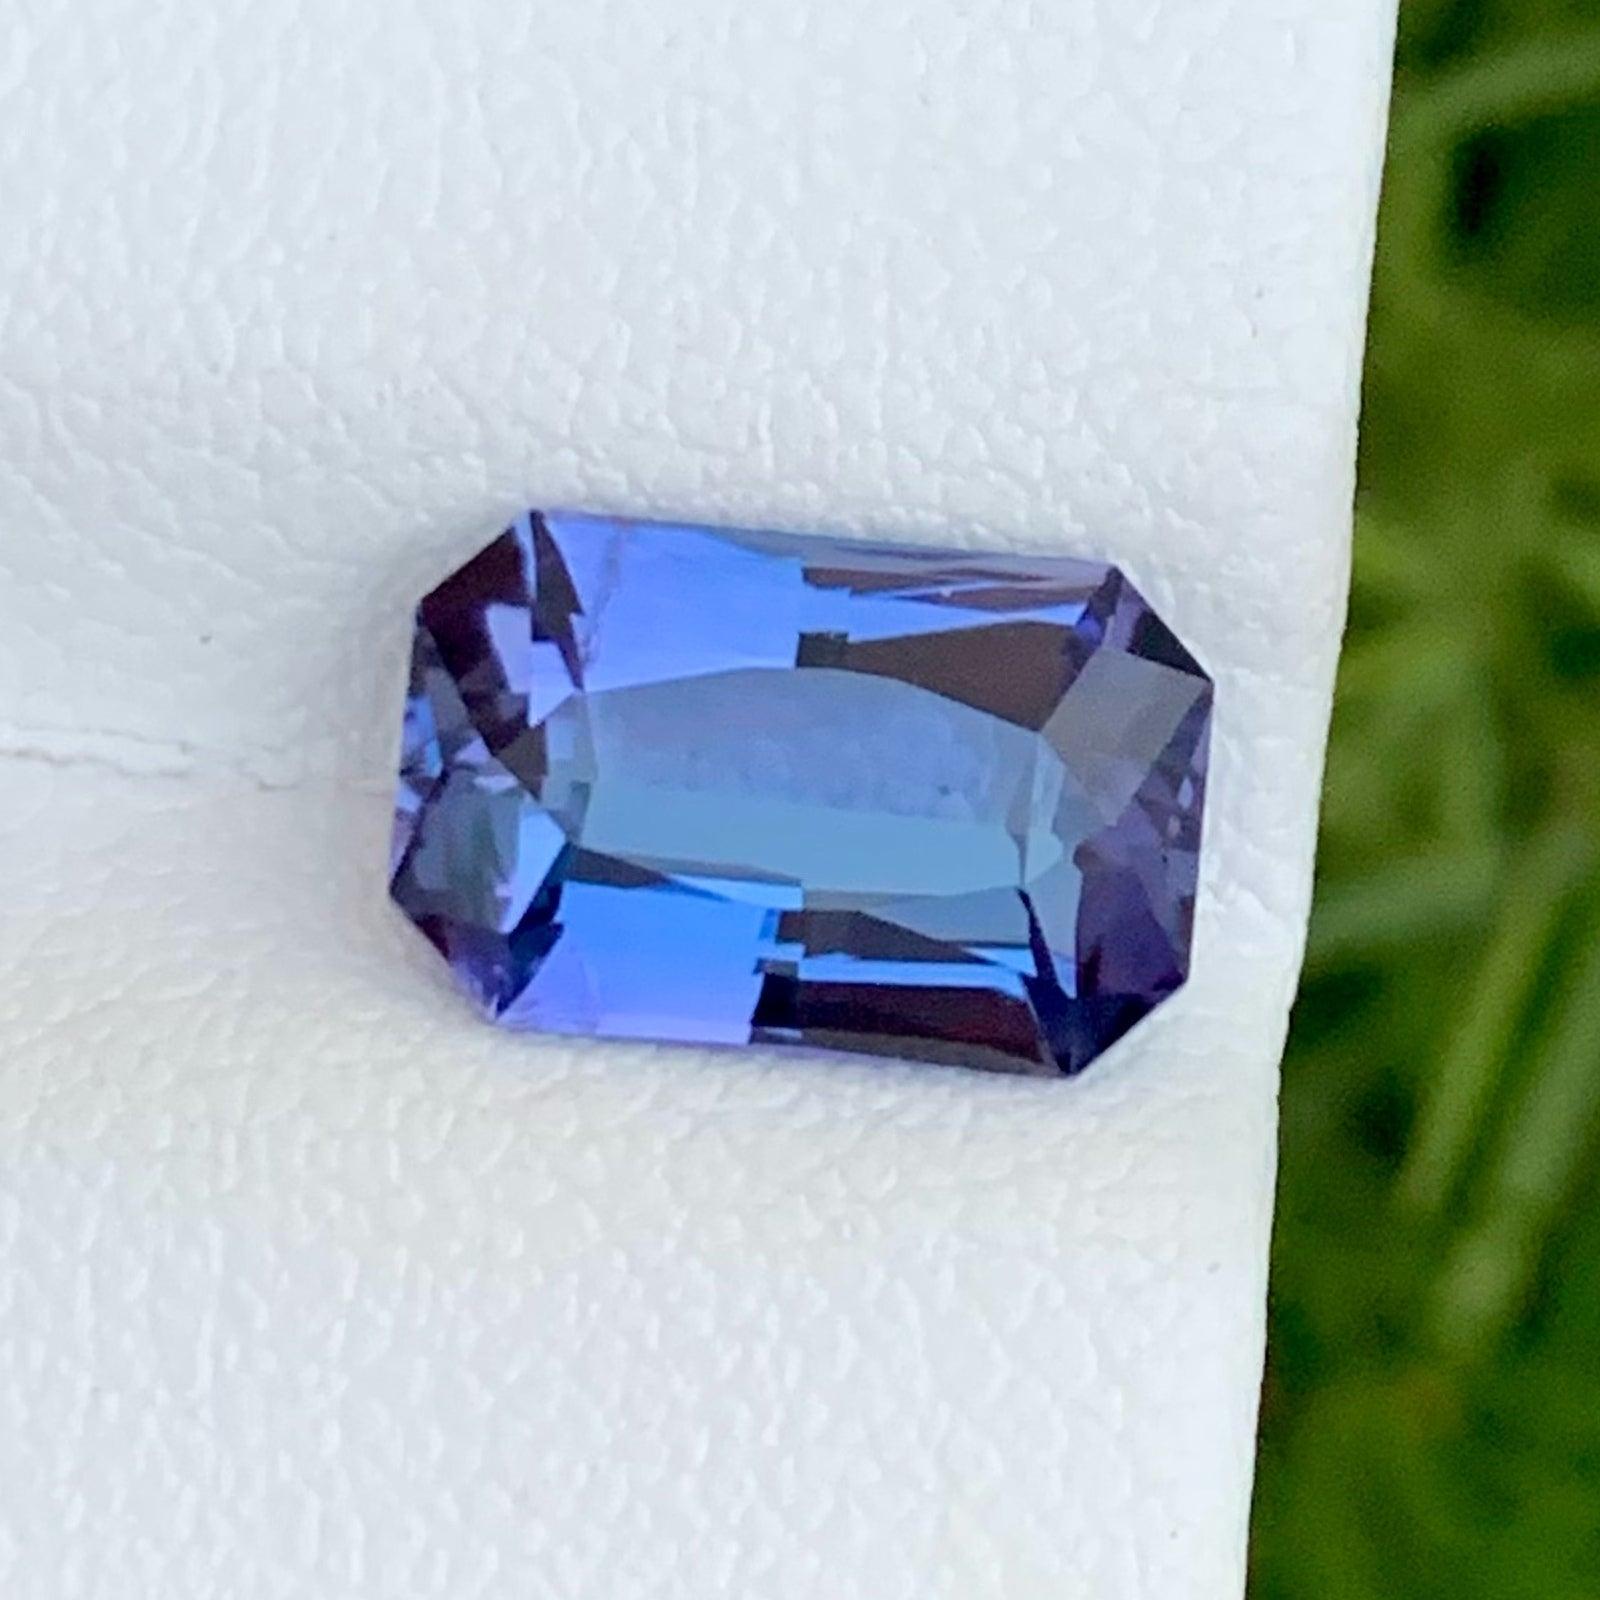 Stunning Natural Blue Tanzanite Gemstone, available for sale at wholesale price natural high quality 3.00 Carats Loupe Clean Clarity Heated Tanzanite from Tanzania.

Product Information:
GEMSTONE TYPE:	Stunning Natural Blue Tanzanite